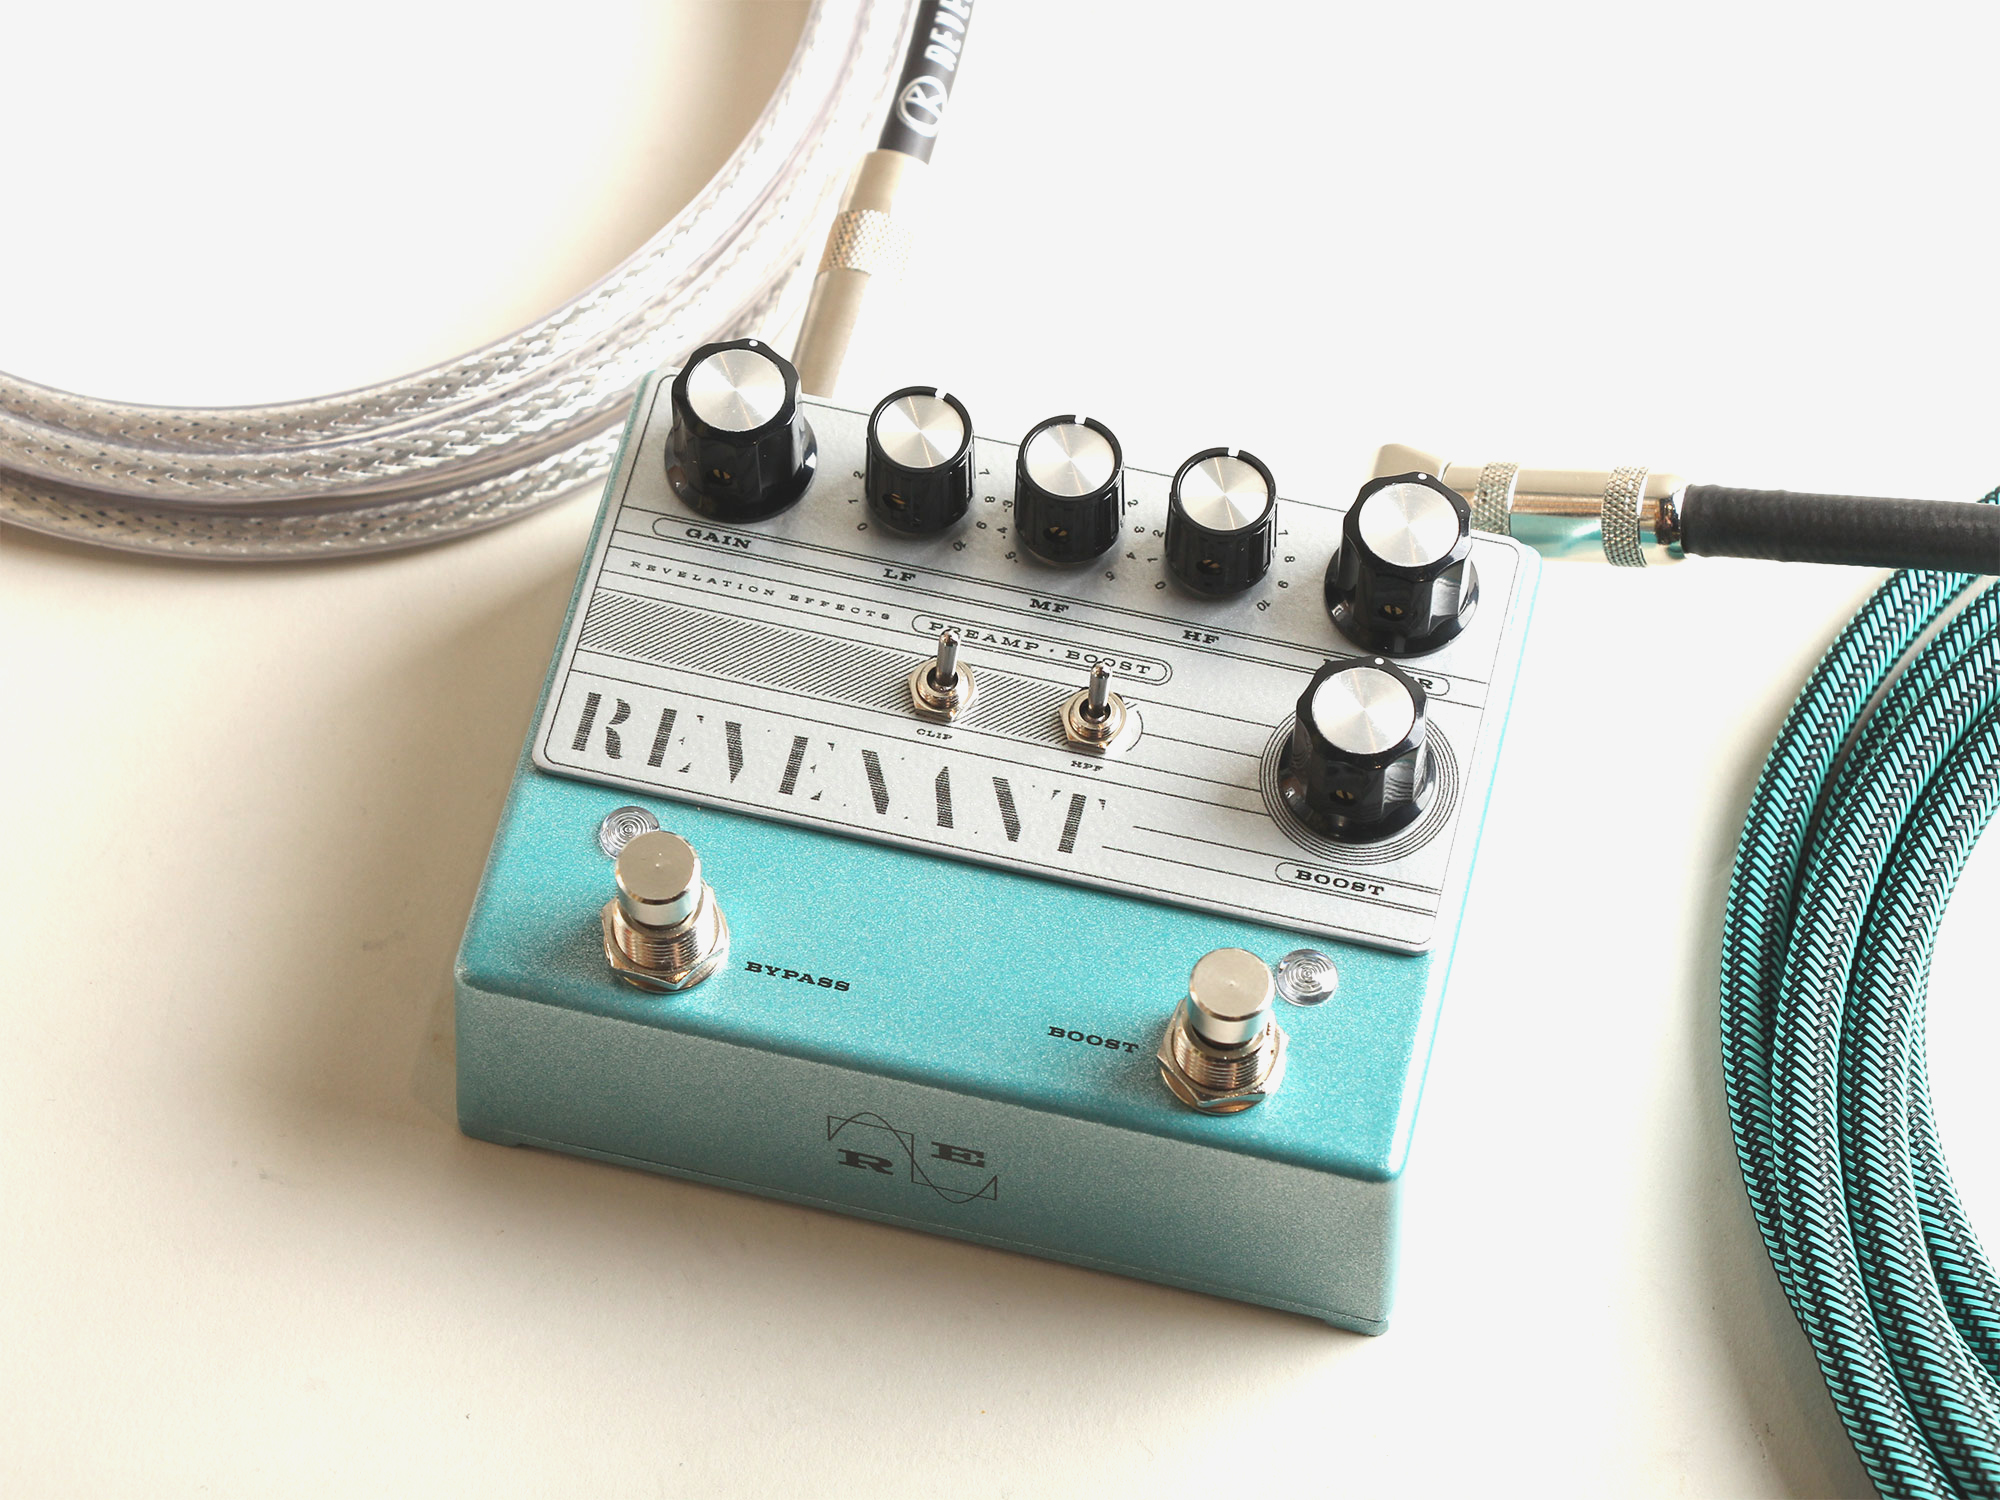 Revelation Effects REVENANT Preamp-Boost V1.2 -Teal Sparkle with Silver face plate- (Limited) レベレーションエフェクト サブ画像8